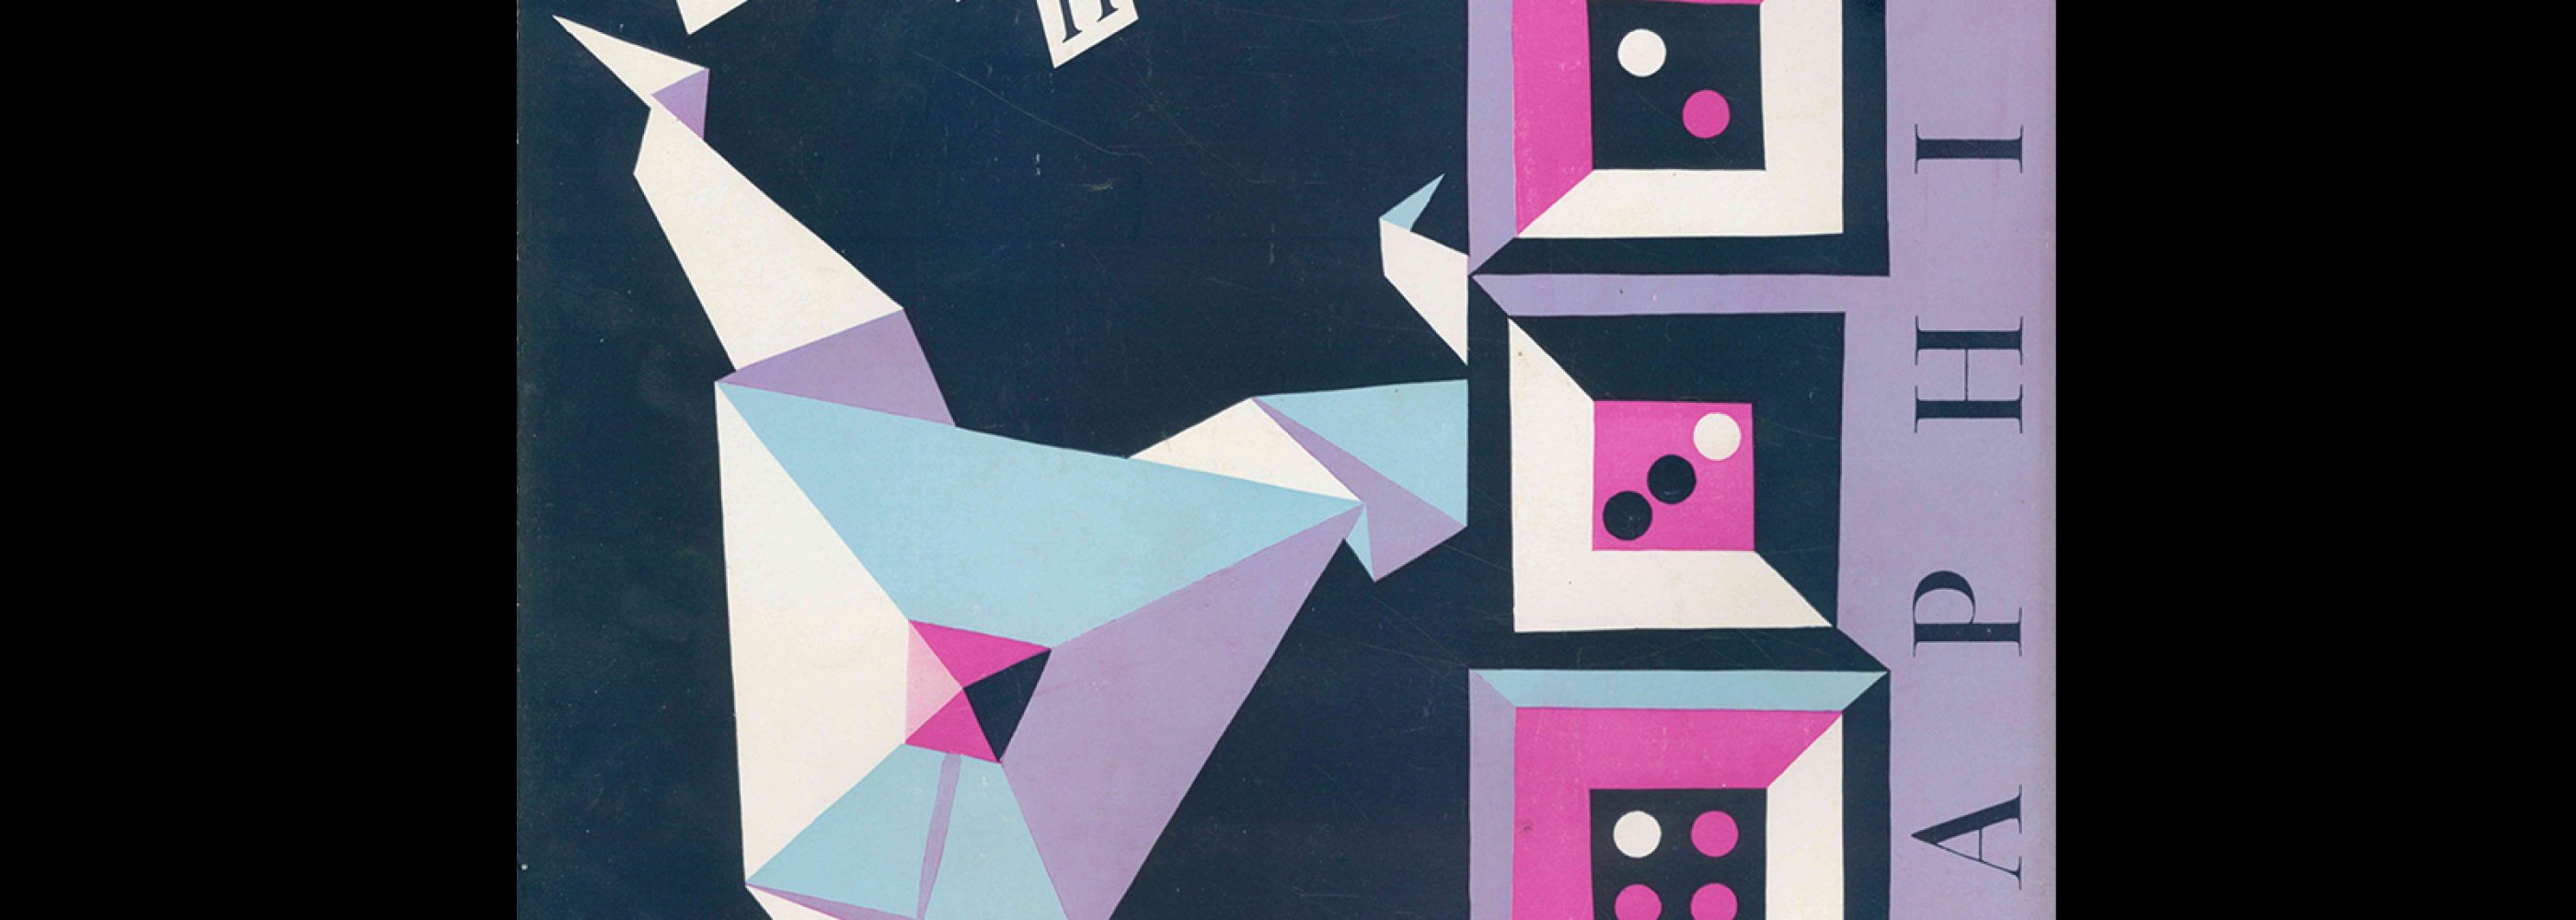 Graphis 35, 1951. Cover design by Asger Jerrild